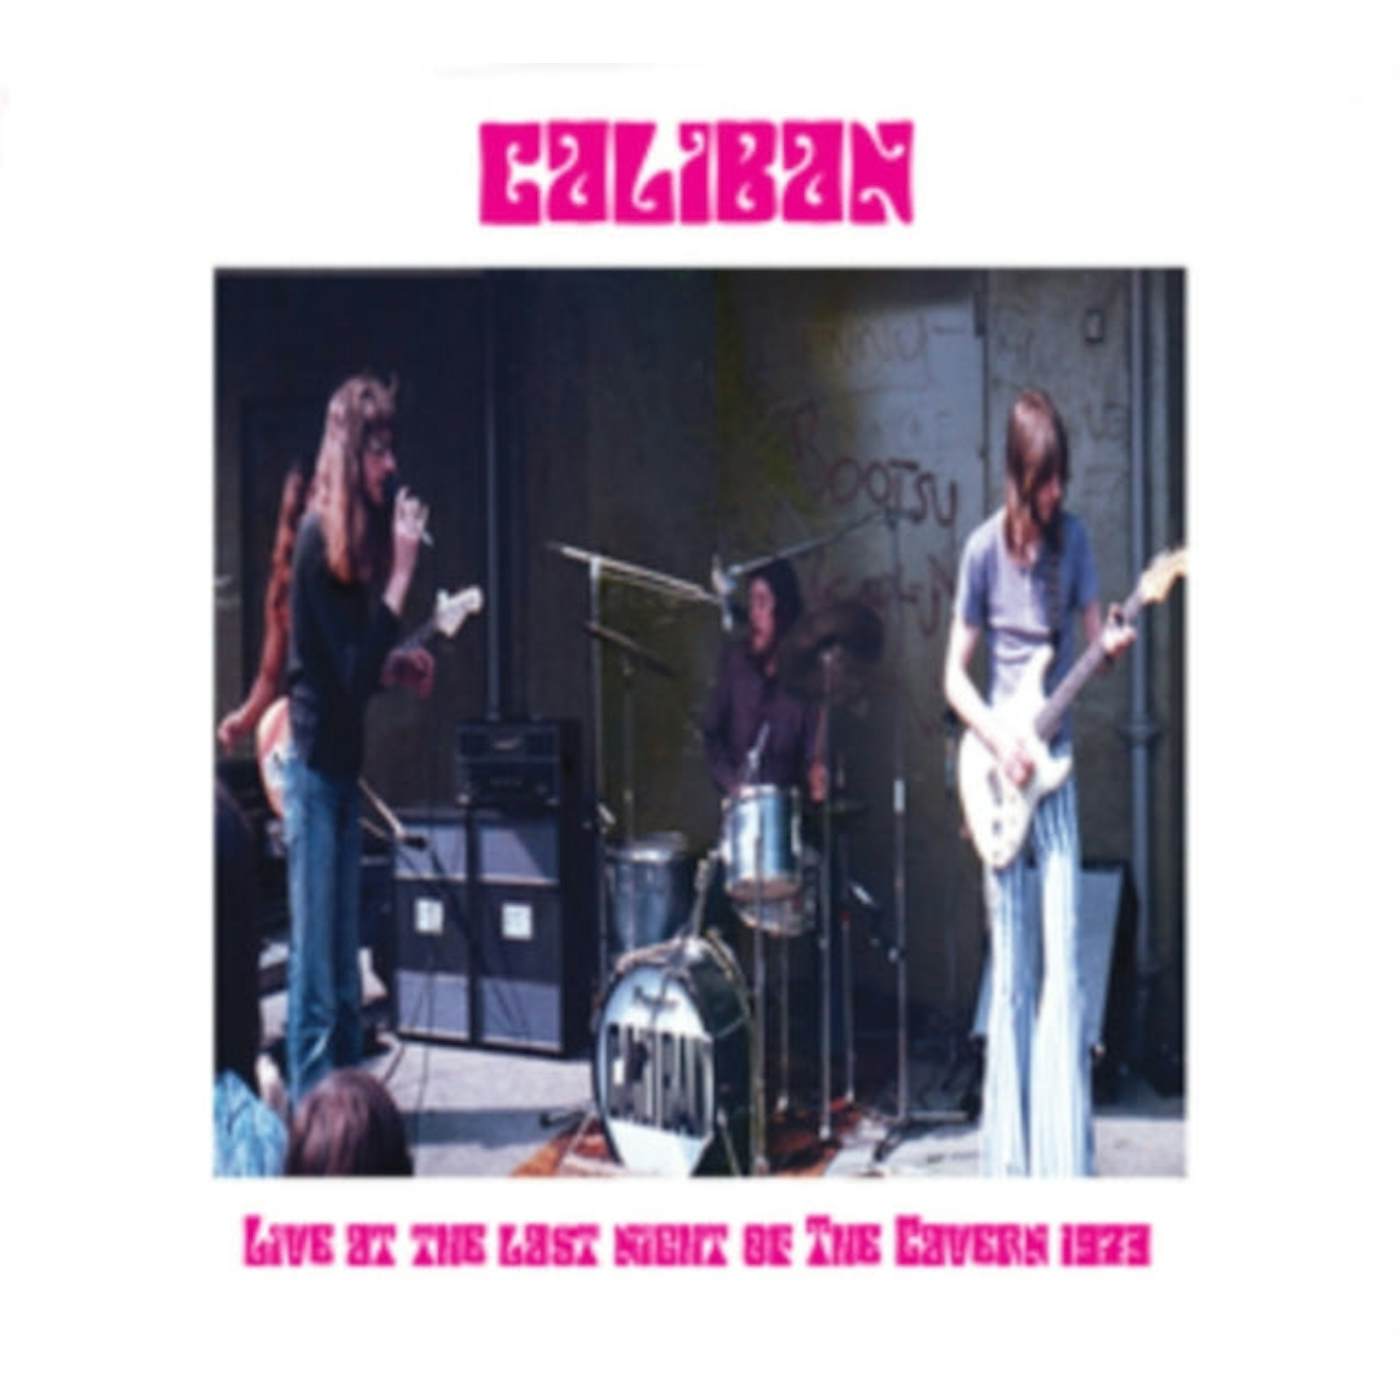 Caliban LP Vinyl Record - Live At The Last Night Of The Cavern 19 73